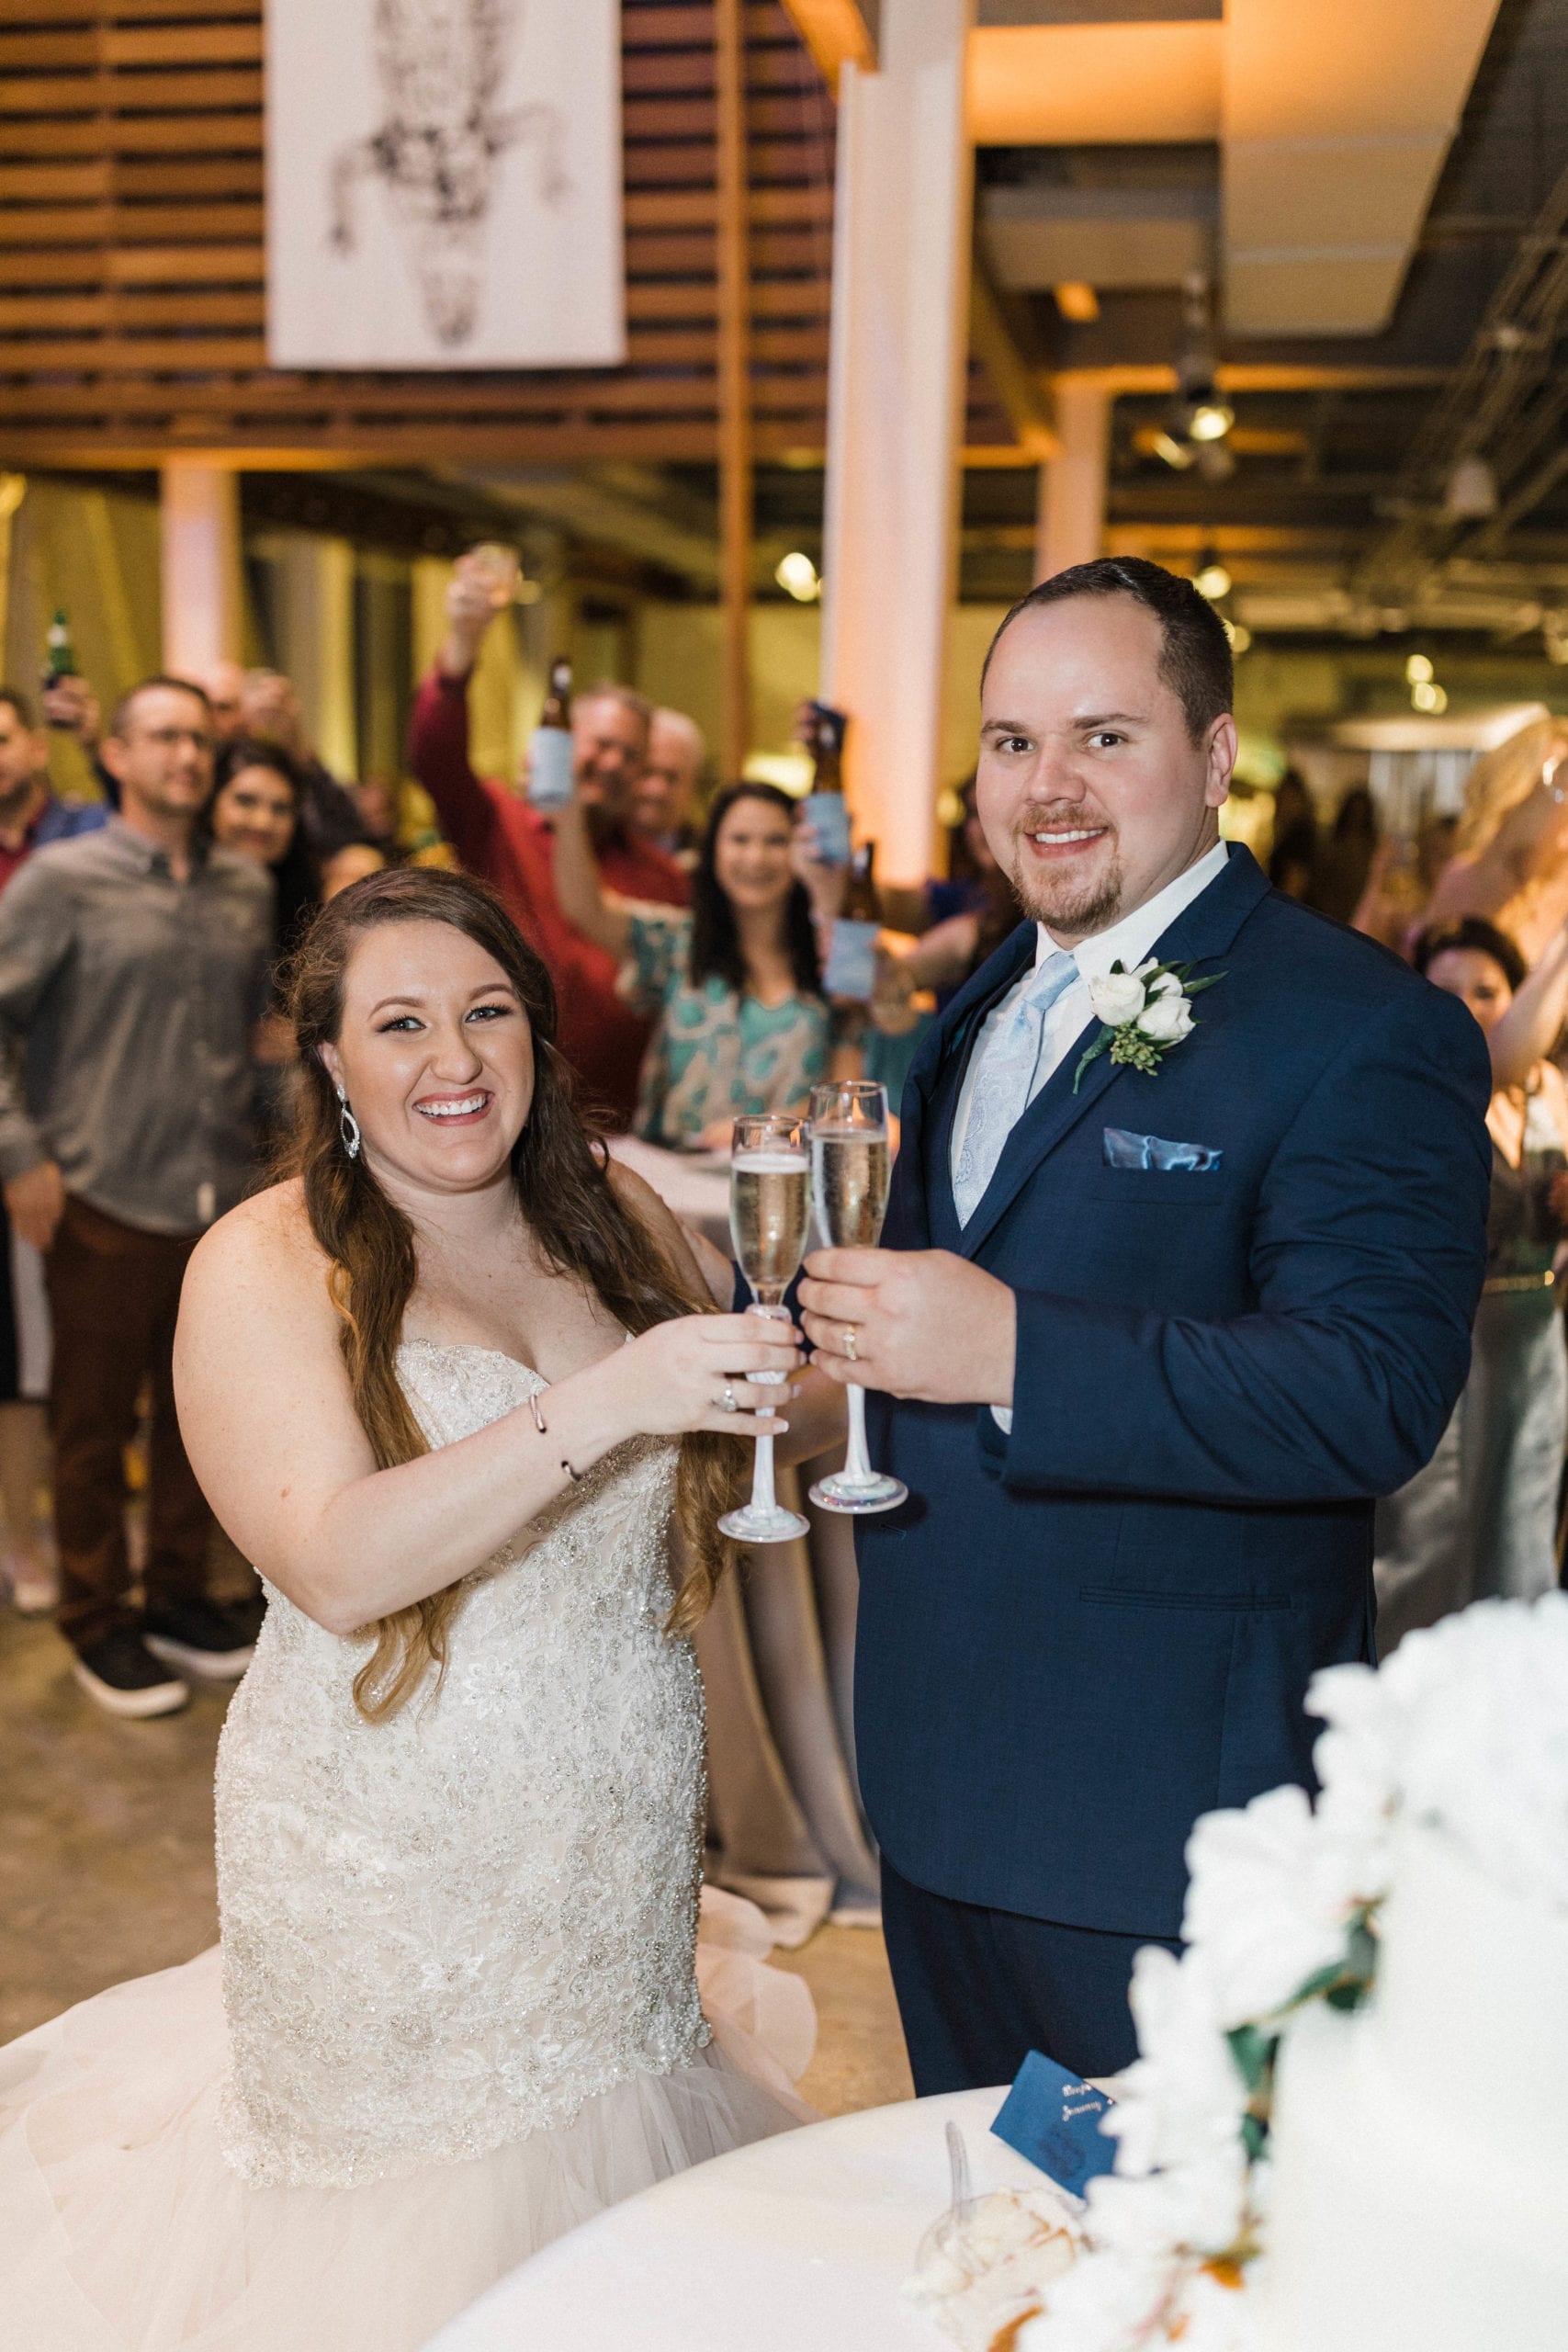 Bride and Groom toasting at Maritime and Seafood Industry Museum wedding reception